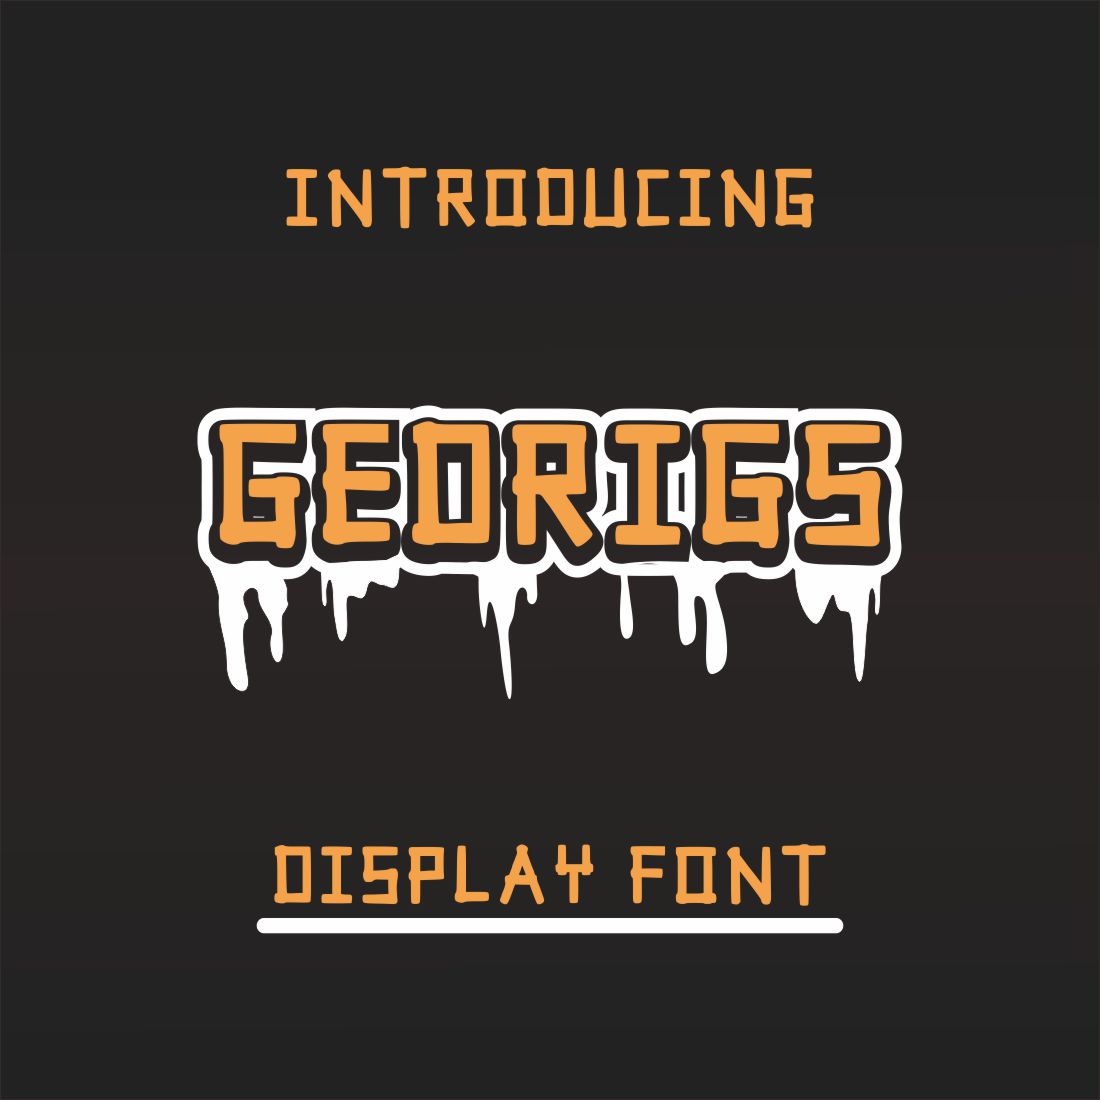 Font Gedrig for Display cover image.